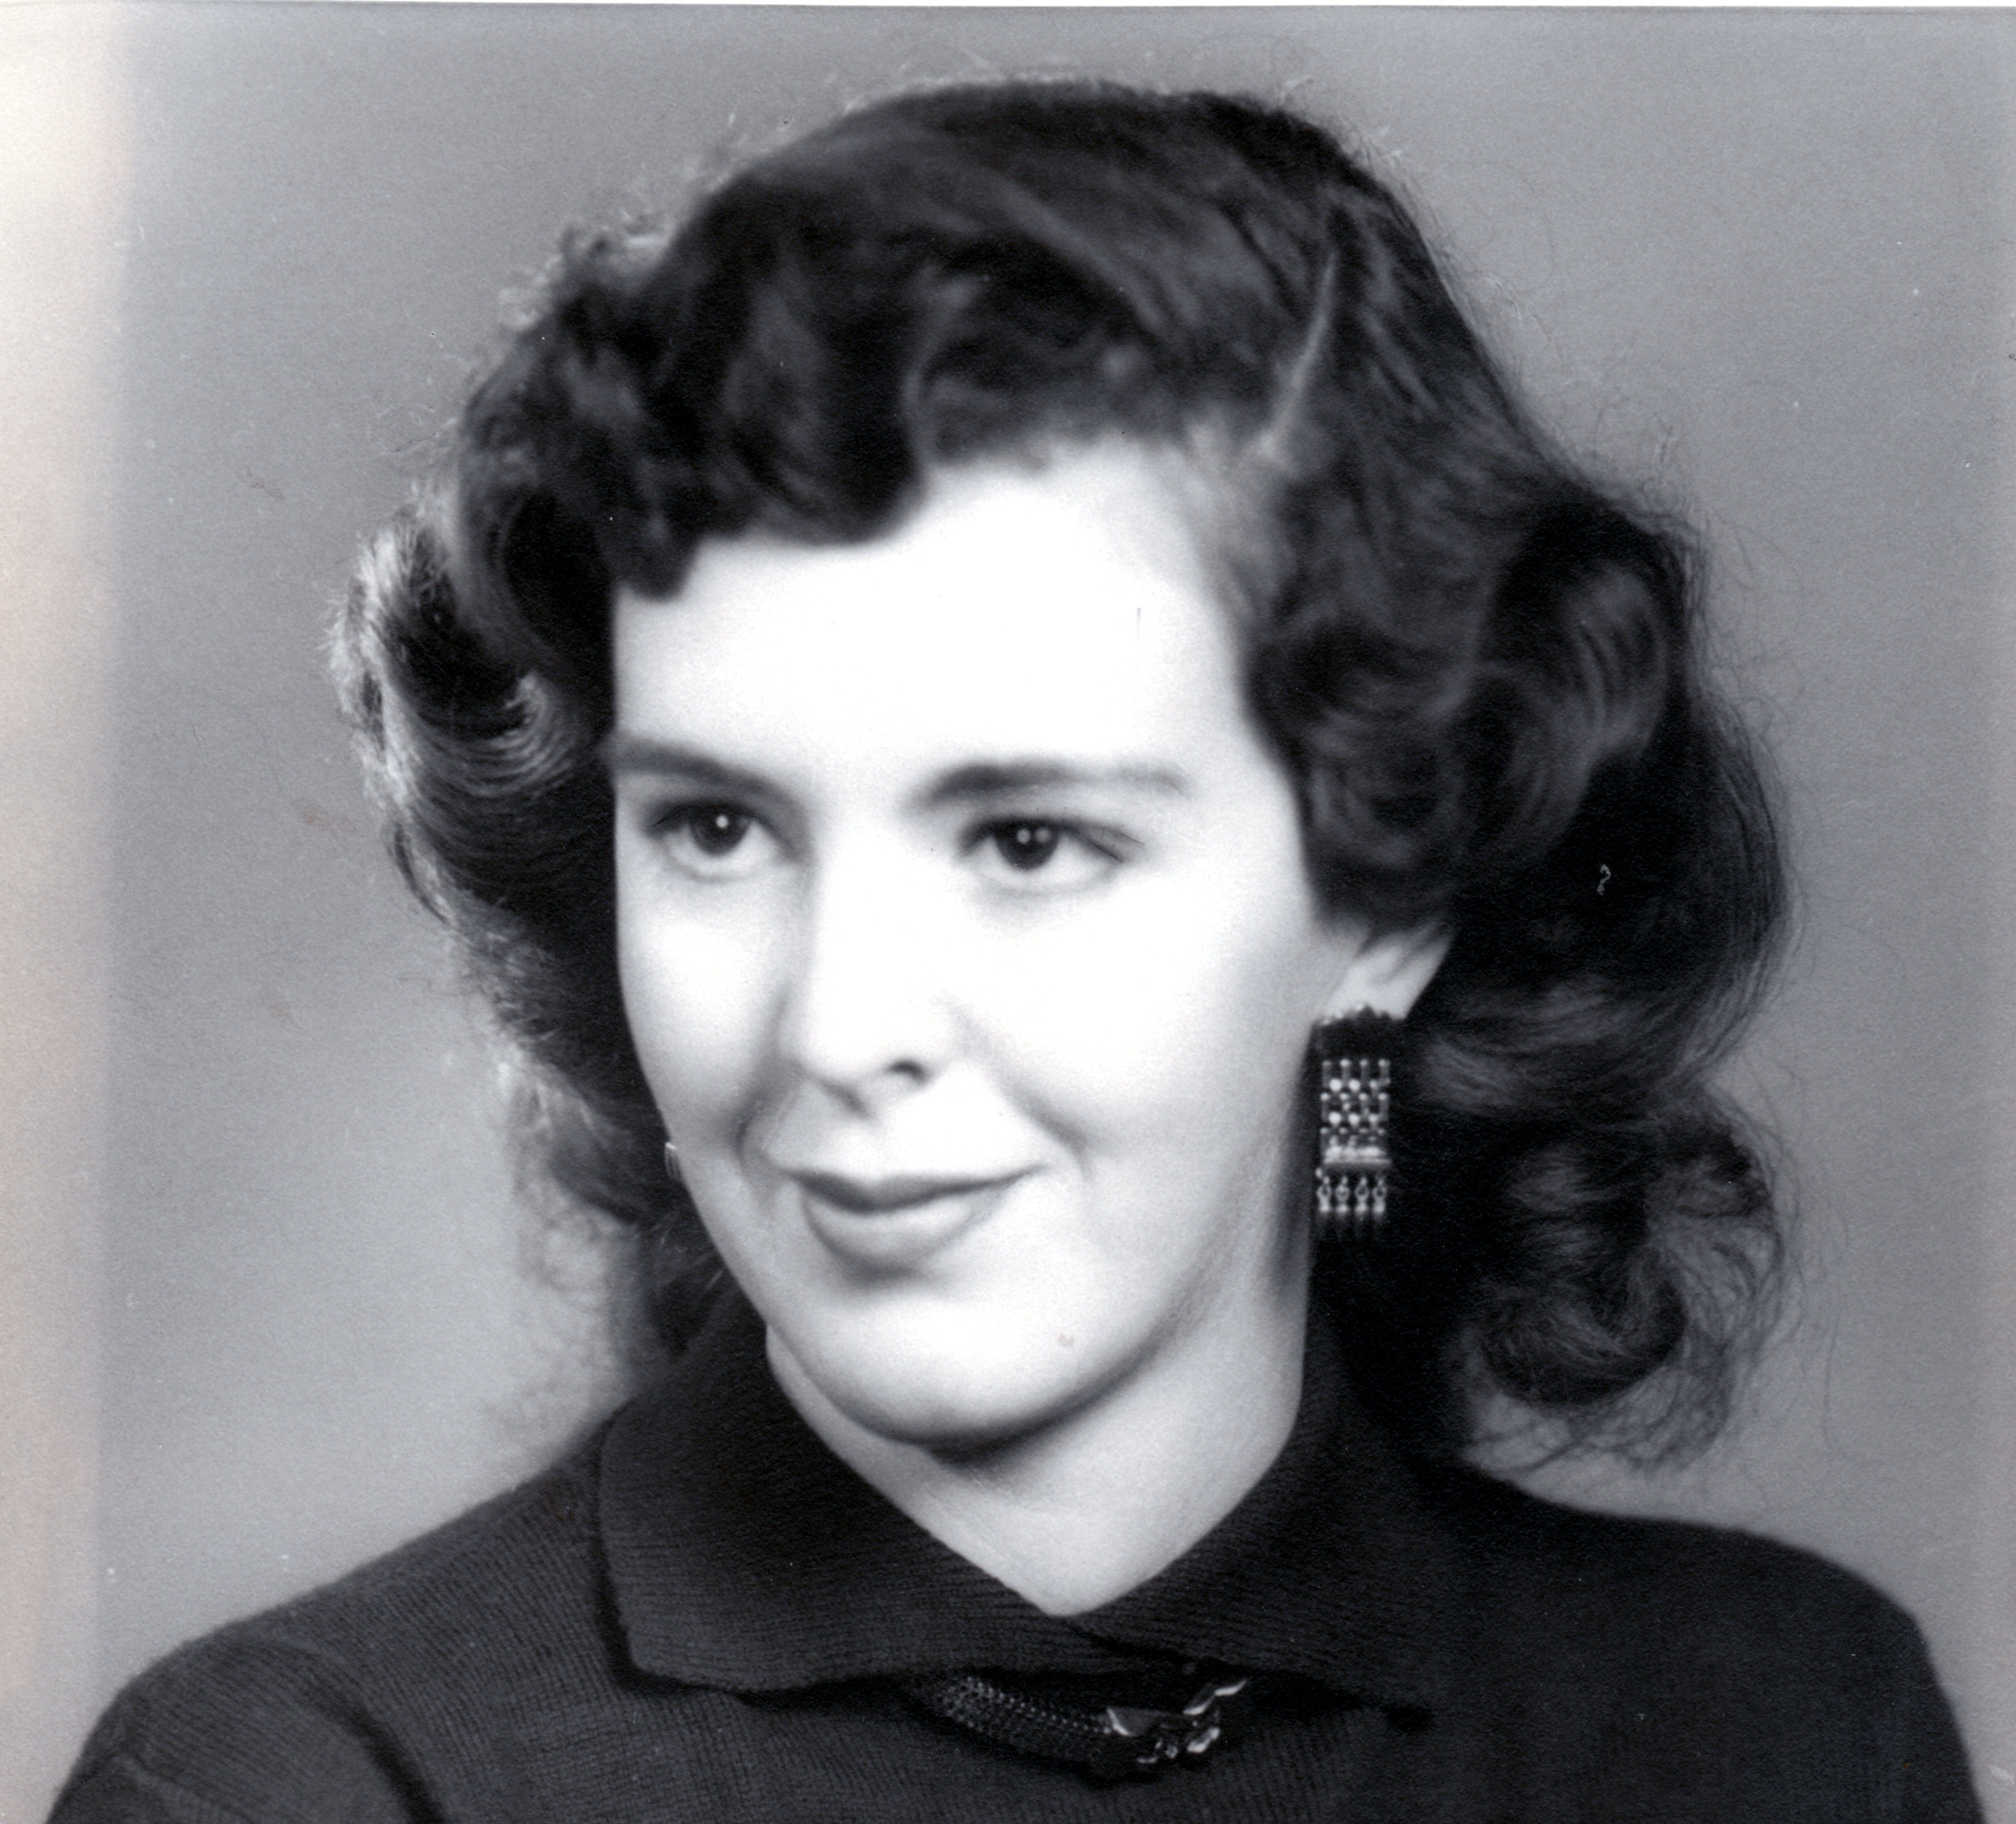 arbara Houck Miller, pictured here in a photograph she gave her husband, Professor Emeritus Jim Miller, on their engagement day.